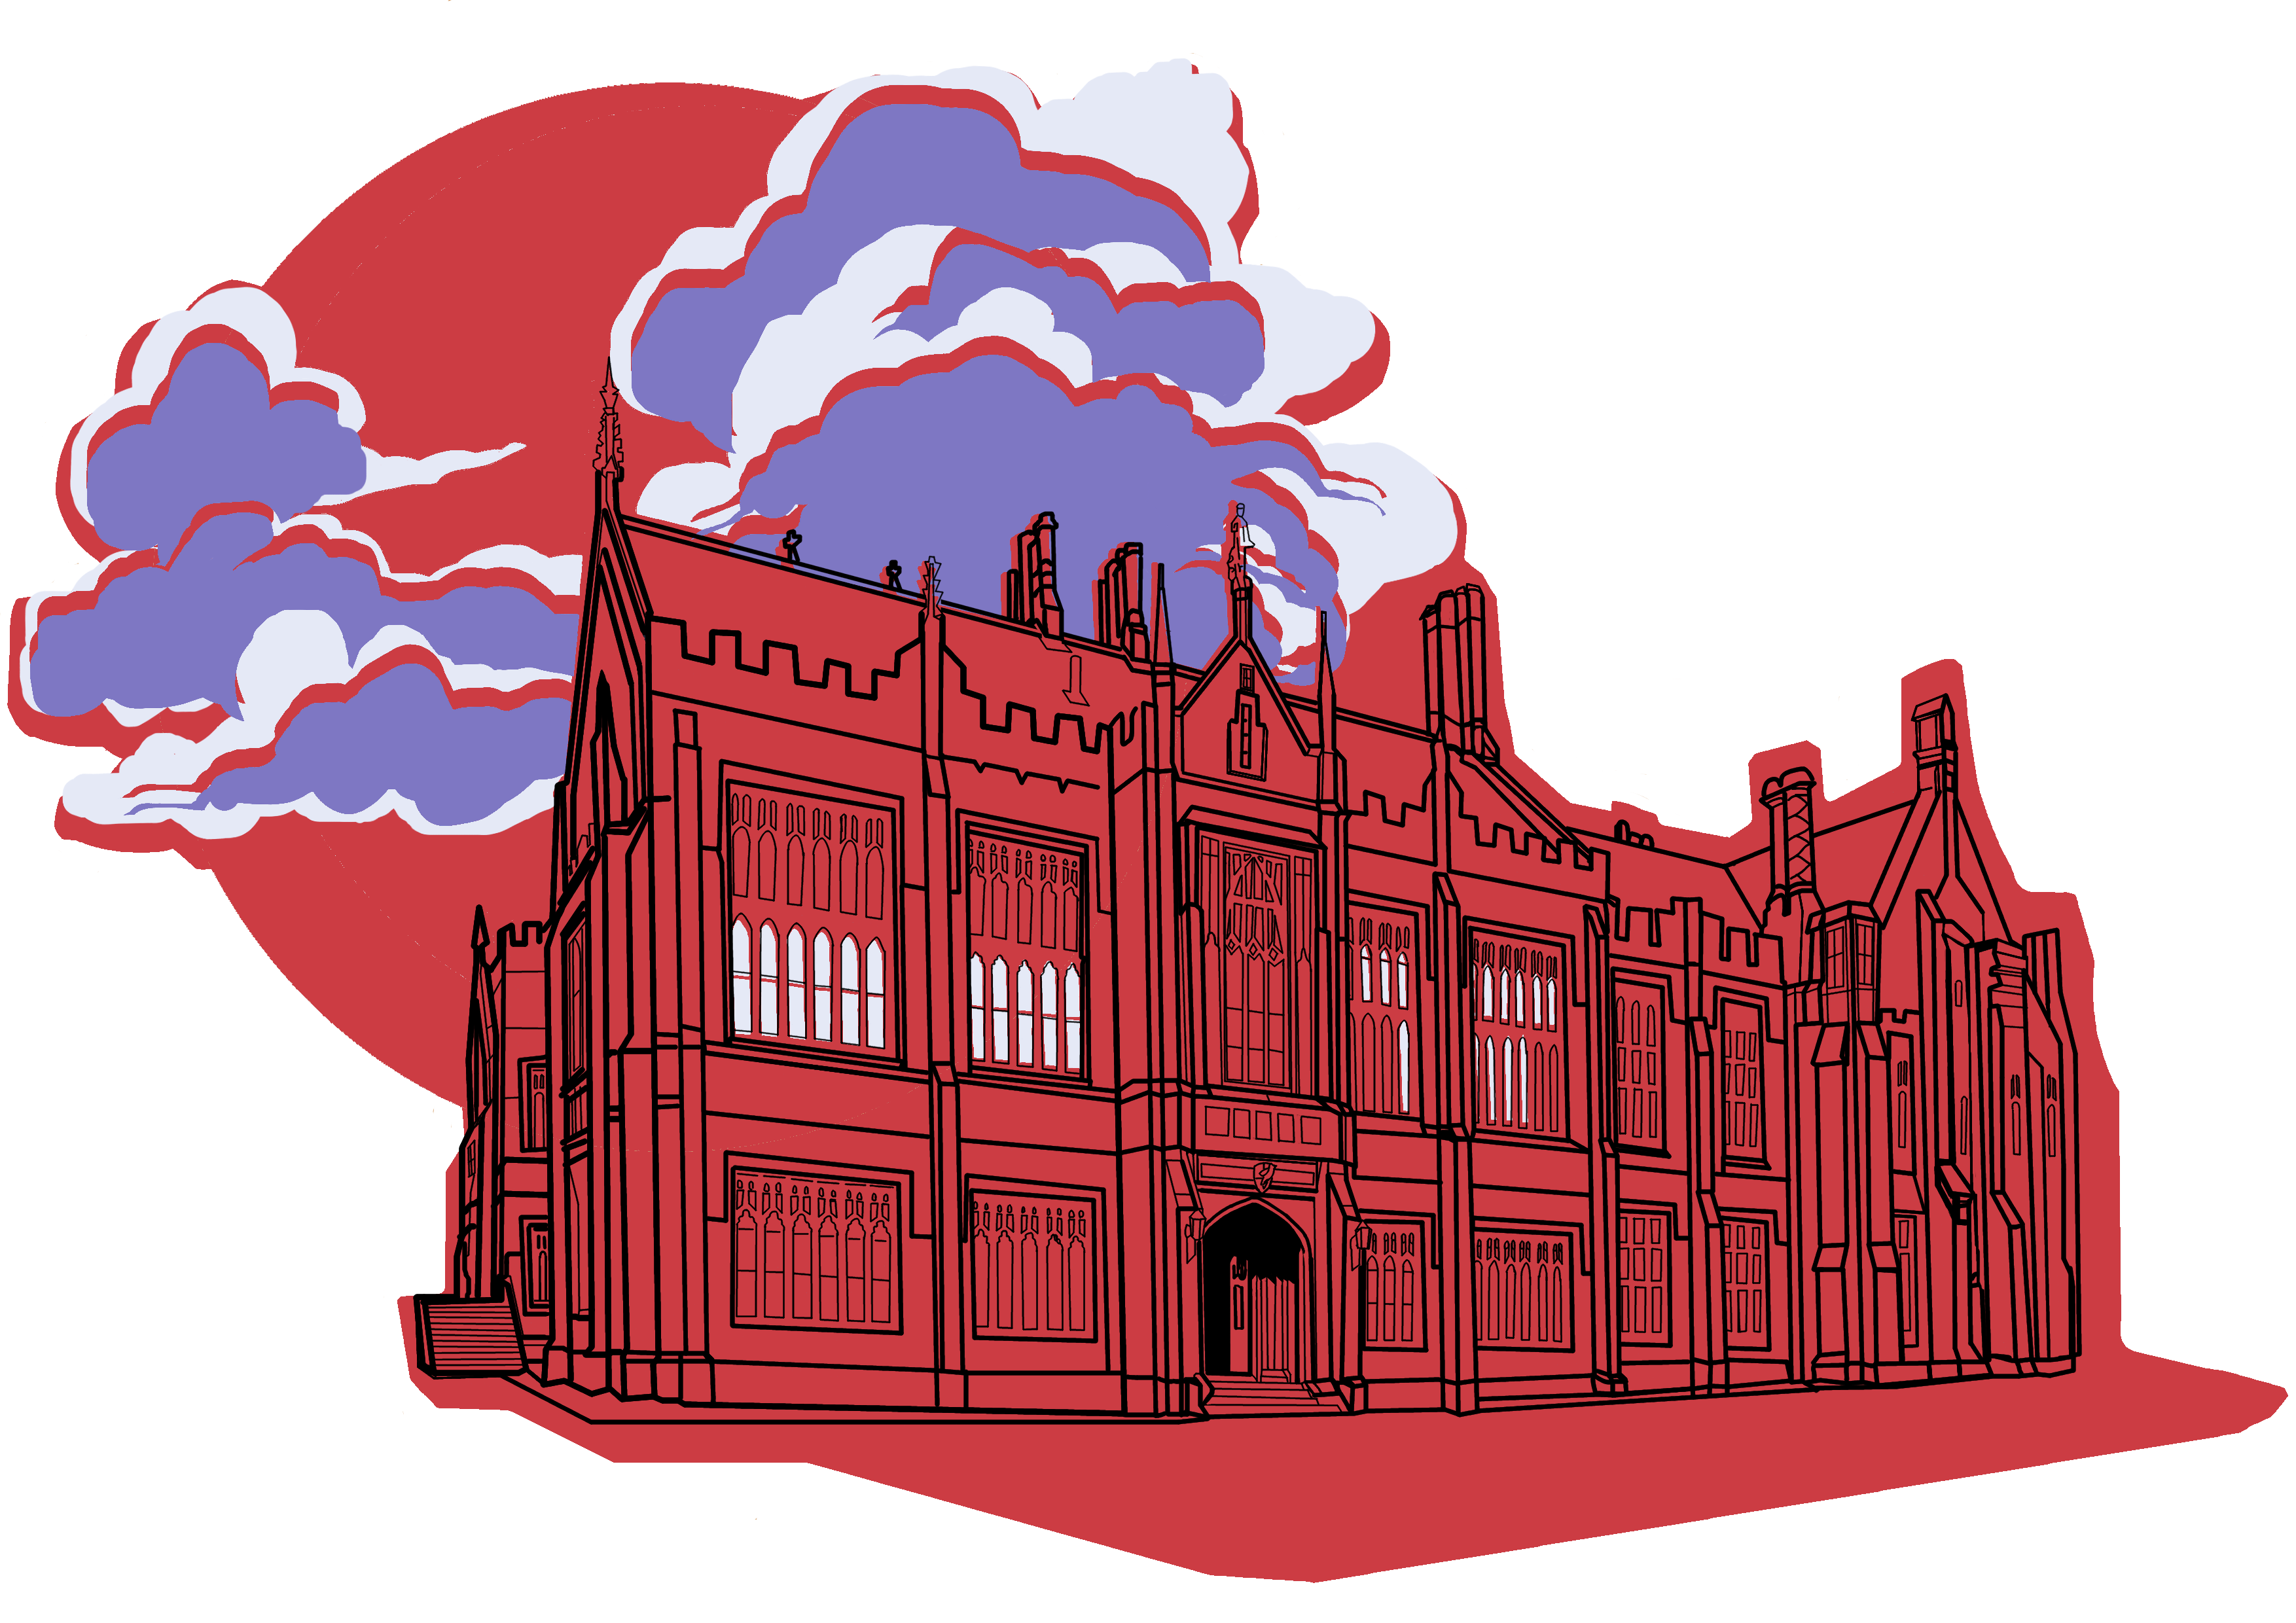 Dramatically rendered line art of a neo-gothic university building against a cloudy full moon, in purple and red